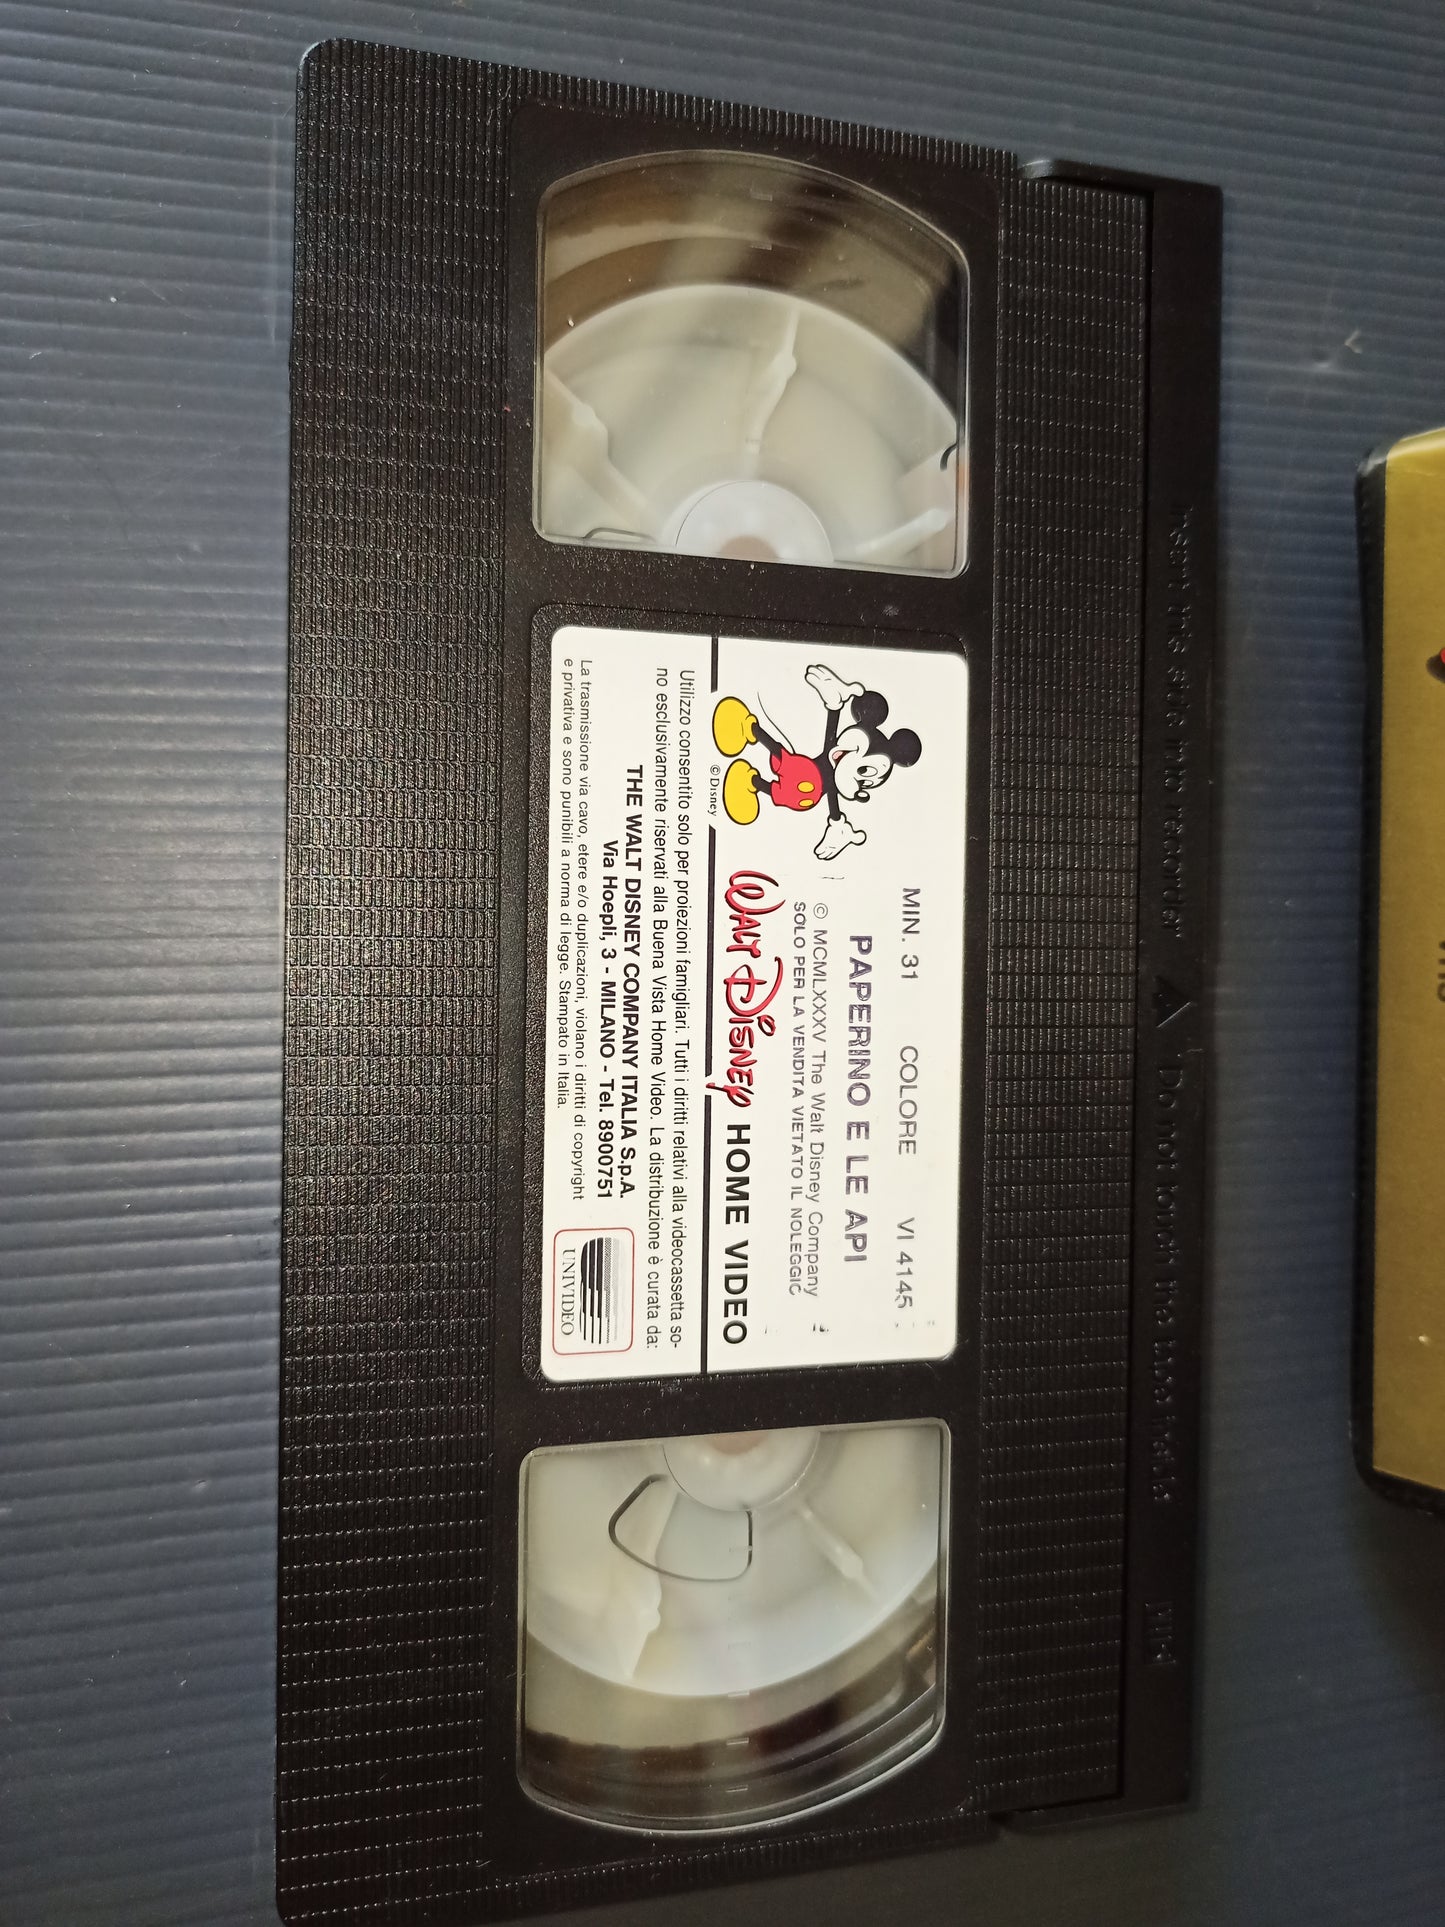 VHS Donald Duck and the Bees, Gold Series 1986